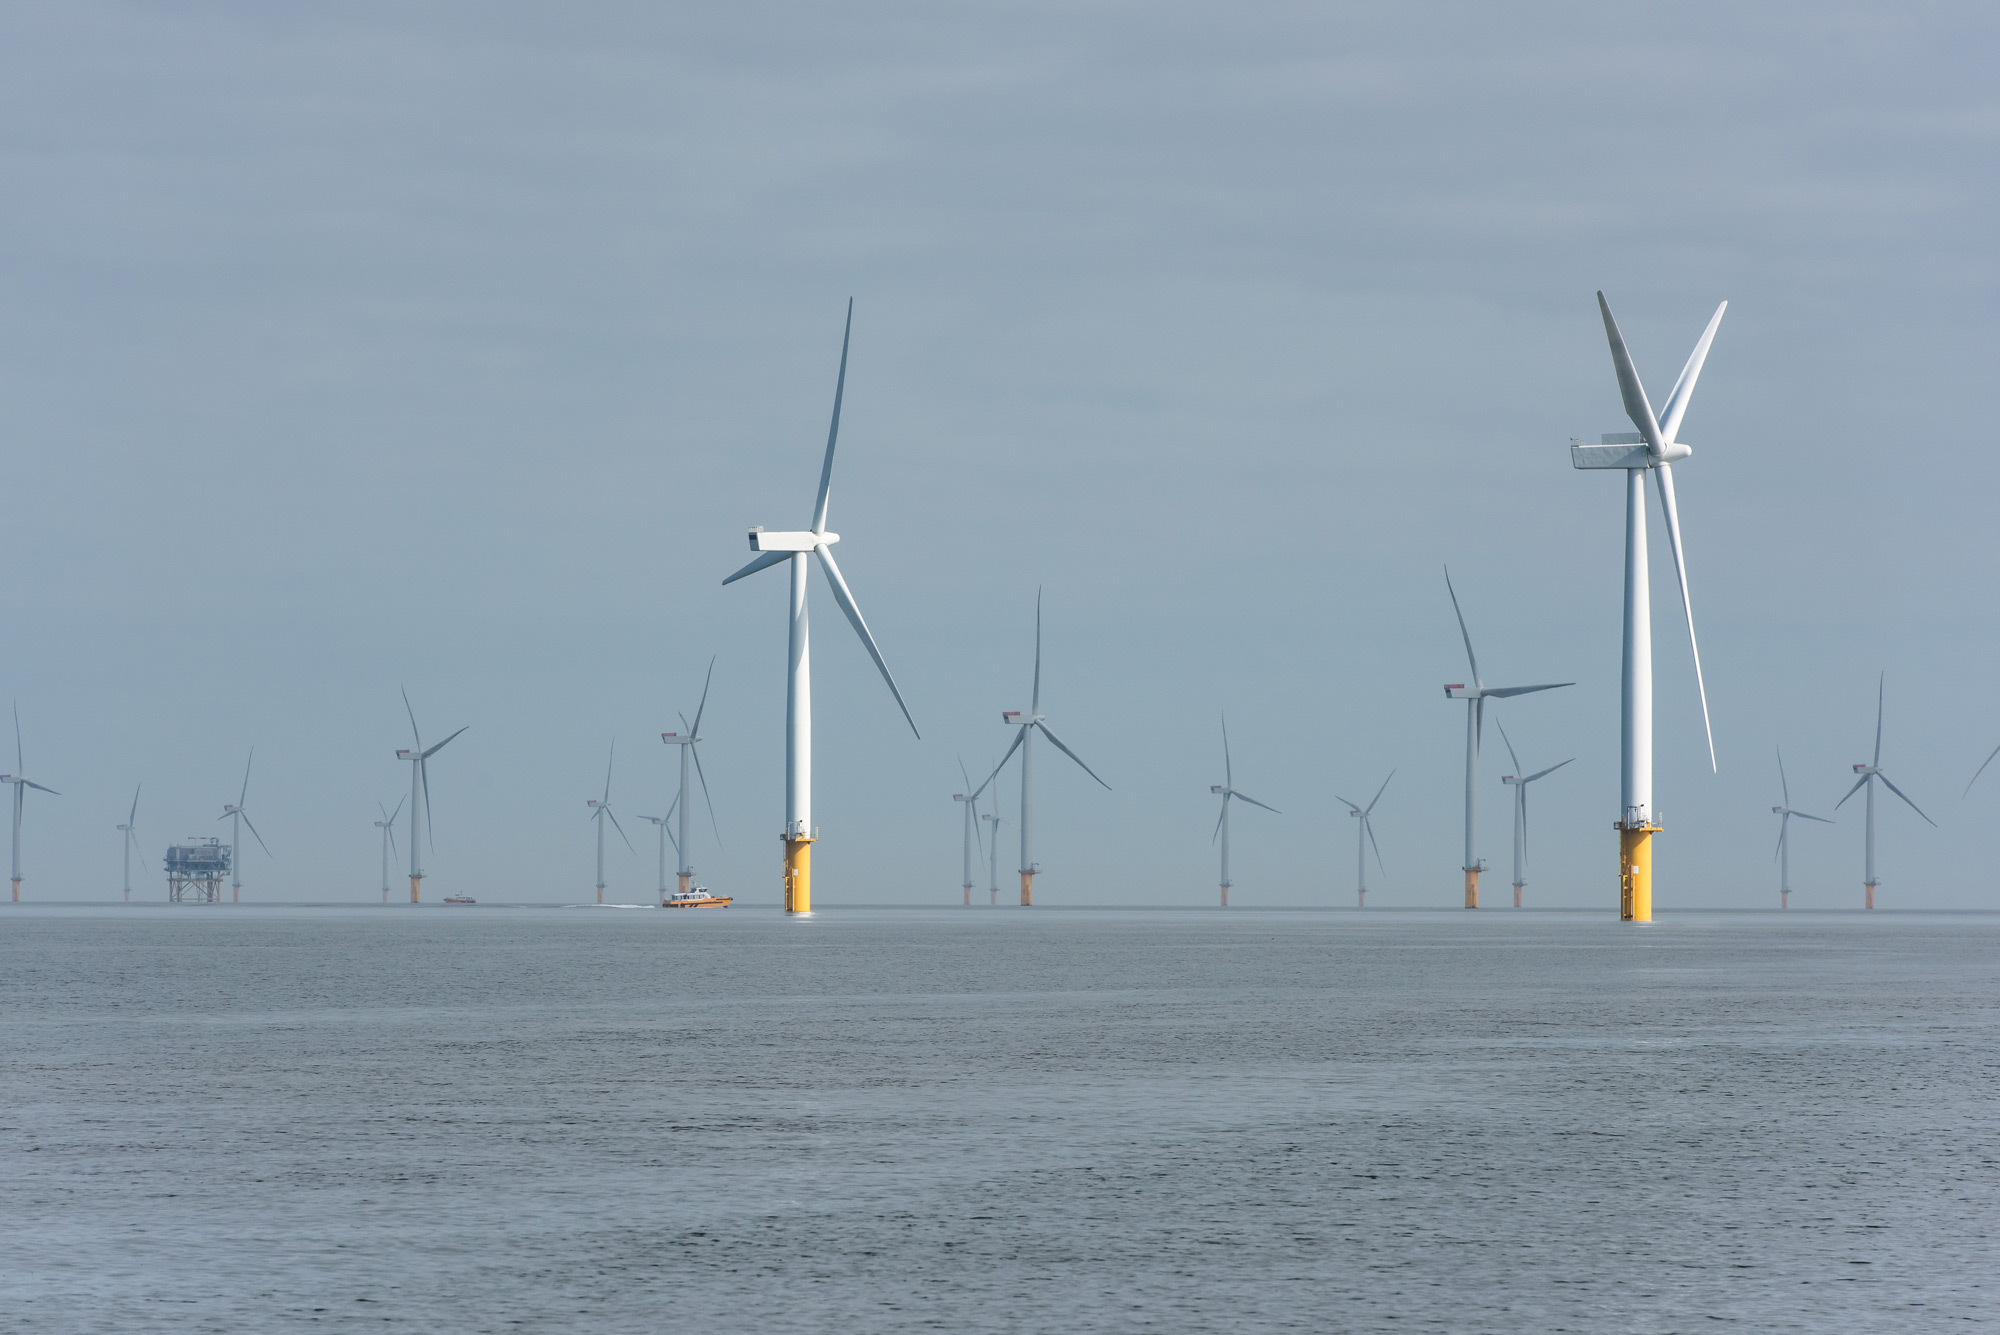 Emergence of Large-Scale Hydrodynamic Structures Due to Atmospheric Offshore Wind Farm Wakes